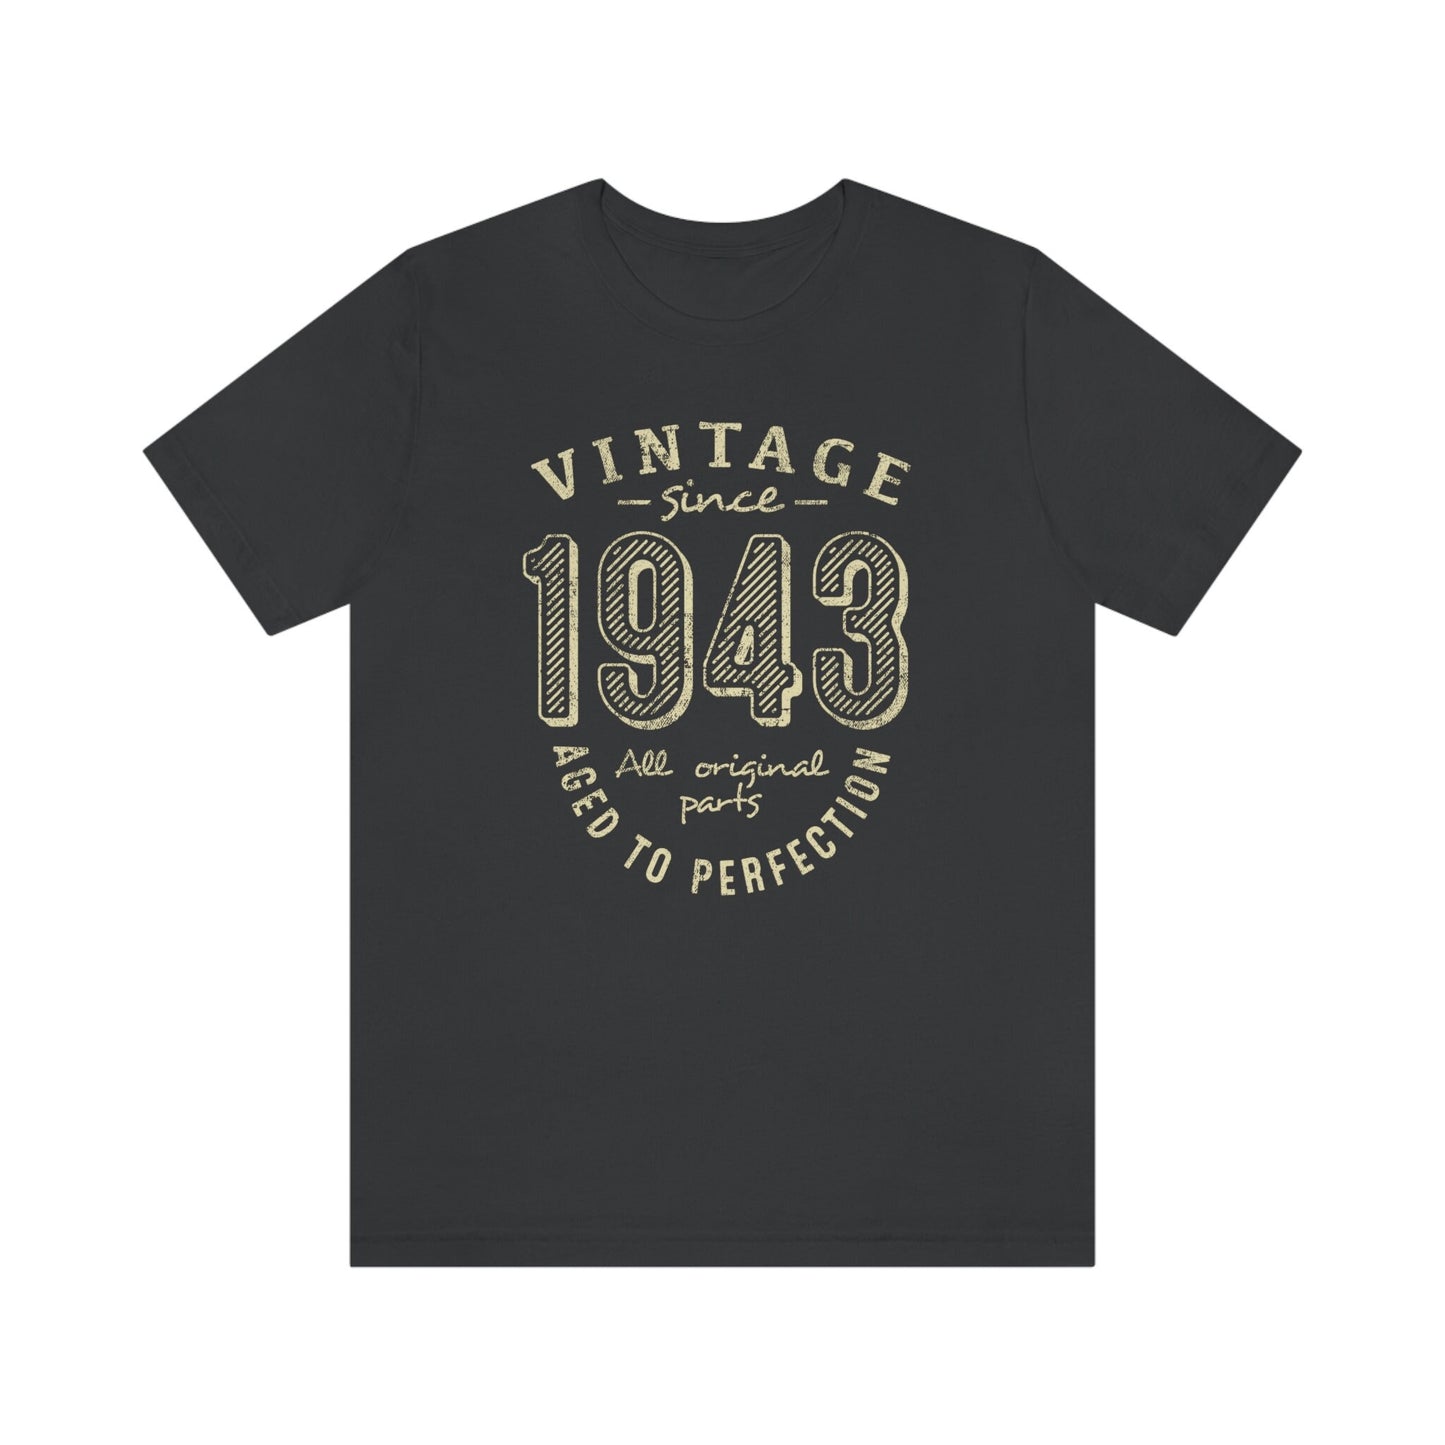 Vintage 1943 birthday shirt for dad or mom, Gift shirt for men or women